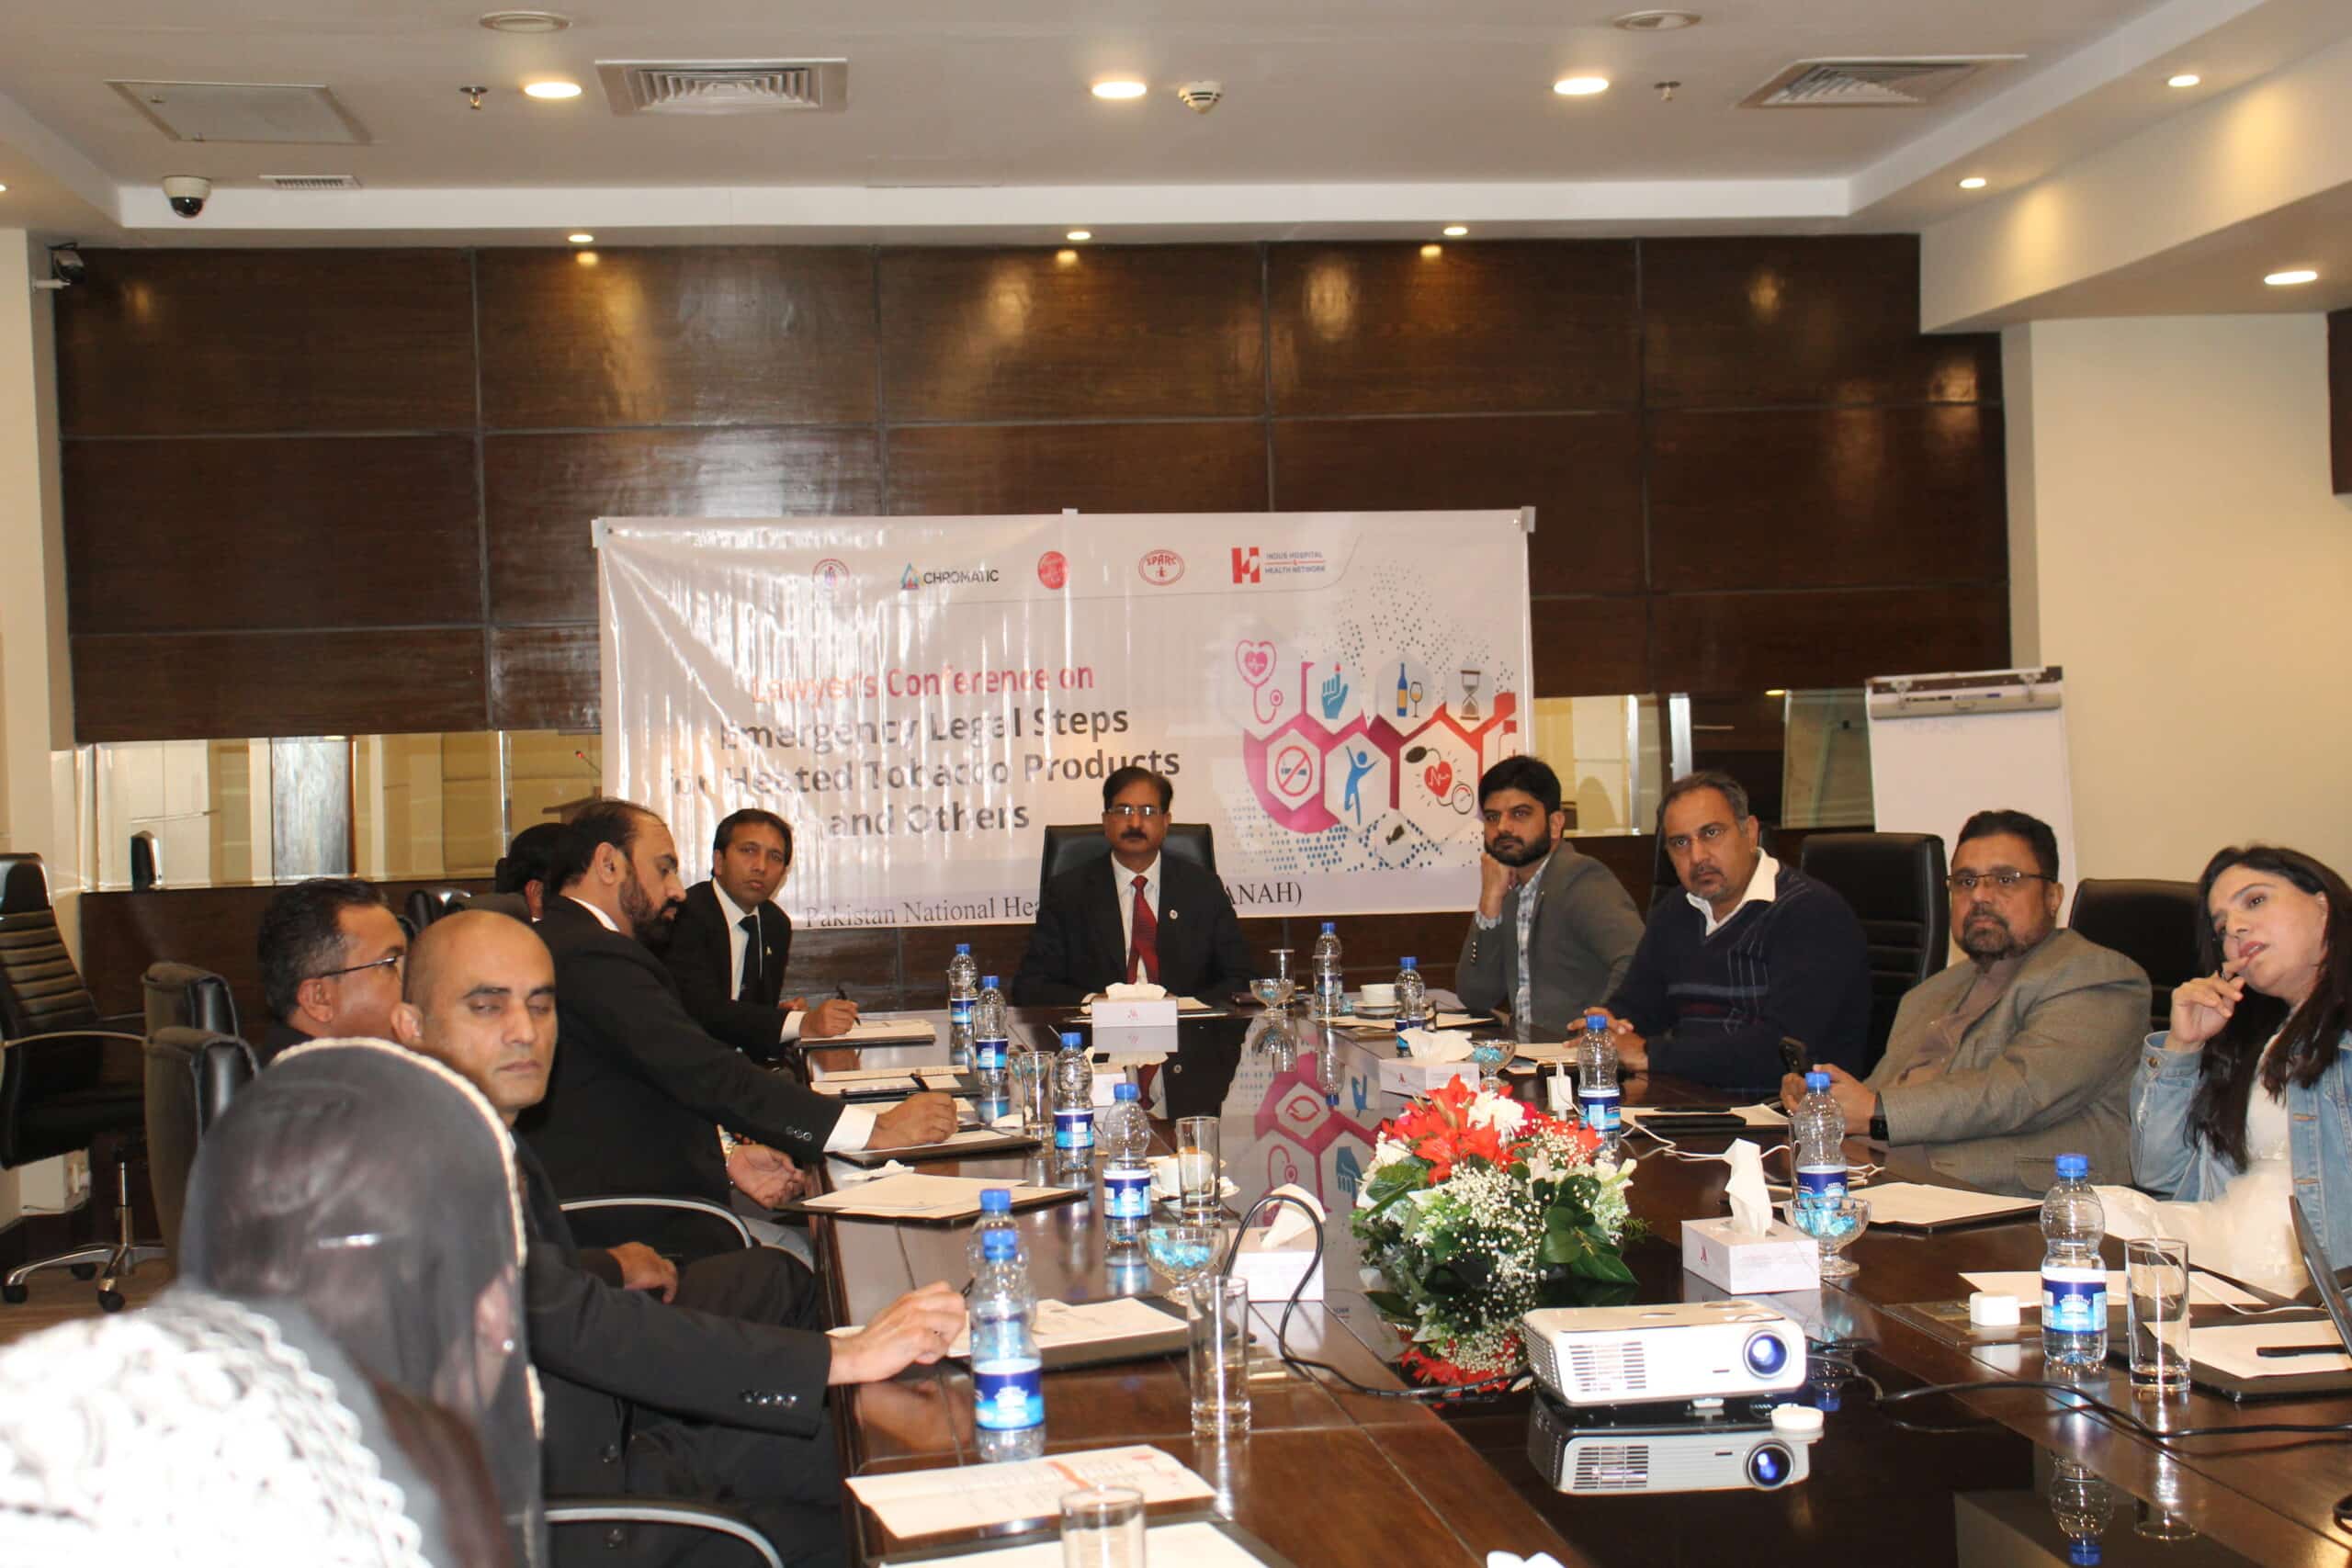 Panah Organized a Lawyer’s Conference on Emergency Legal Steps for Heated Tobacco Products and others at  Marriott Hotel Islamabad 21st Dec.